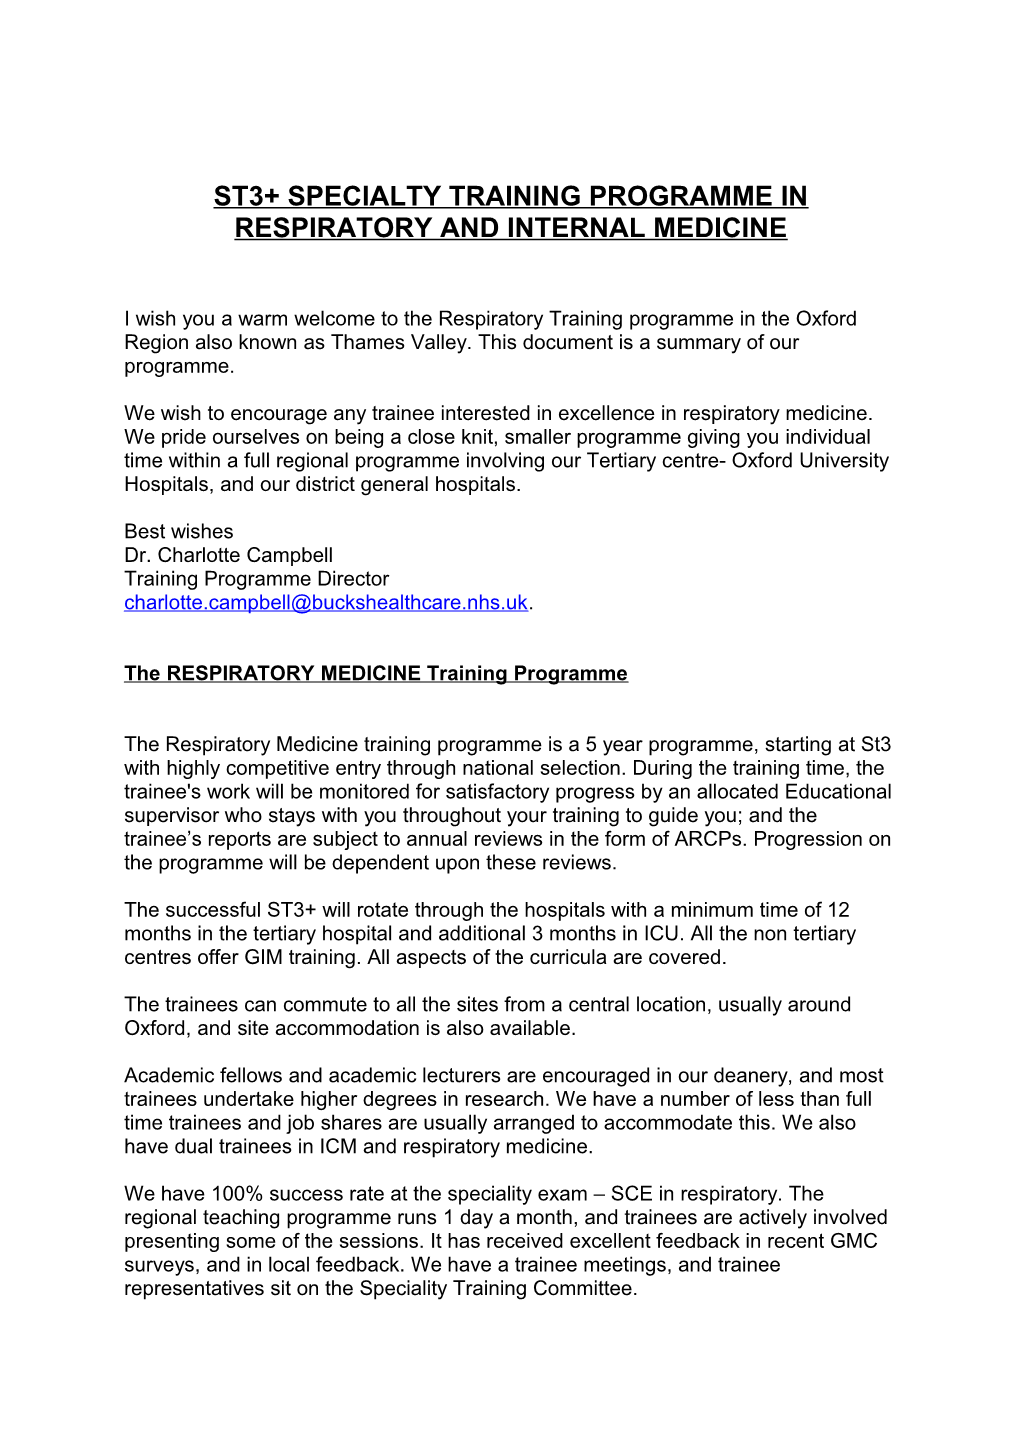 Oxford Deanery Specialty Training Programme in Respiratory Medicine